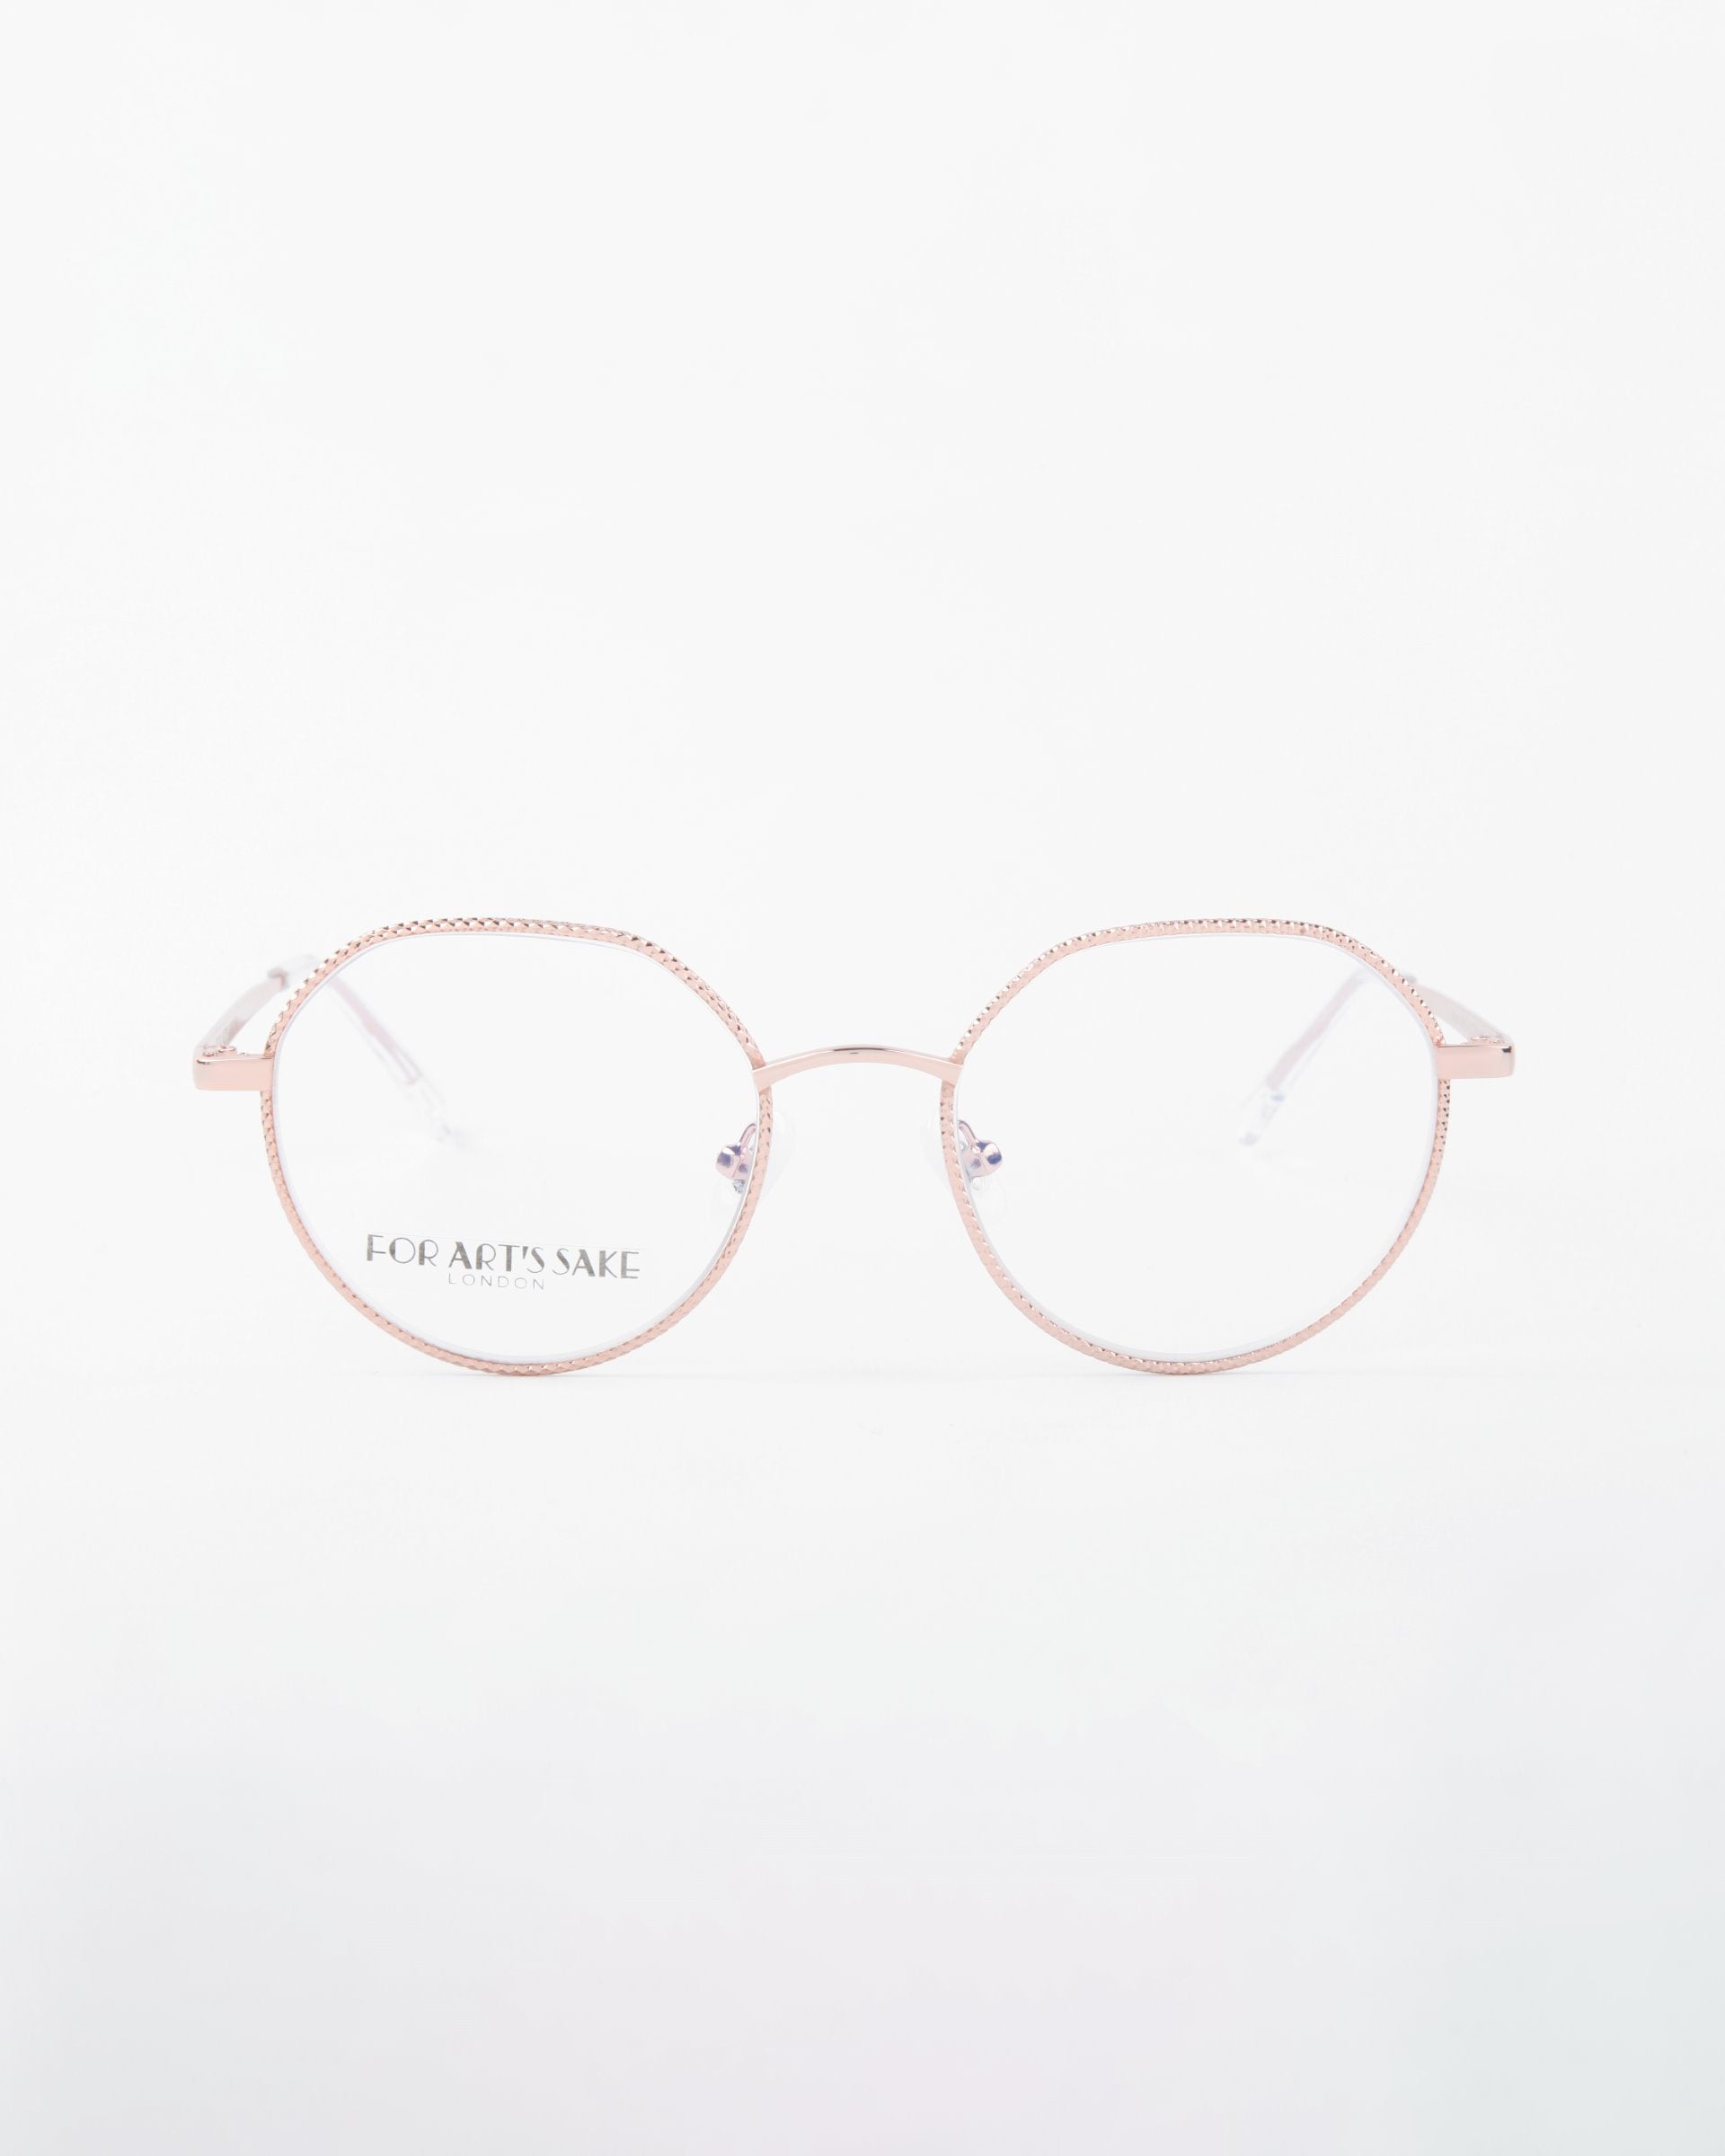 A pair of round eyeglasses with thin, light pink metal frames is displayed against a plain white background. The lenses feature a Blue Light Filter, and the brand name "For Art's Sake®" is visible on the left lens. The slender temples match the frame color perfectly. These eyeglasses are named Hope.